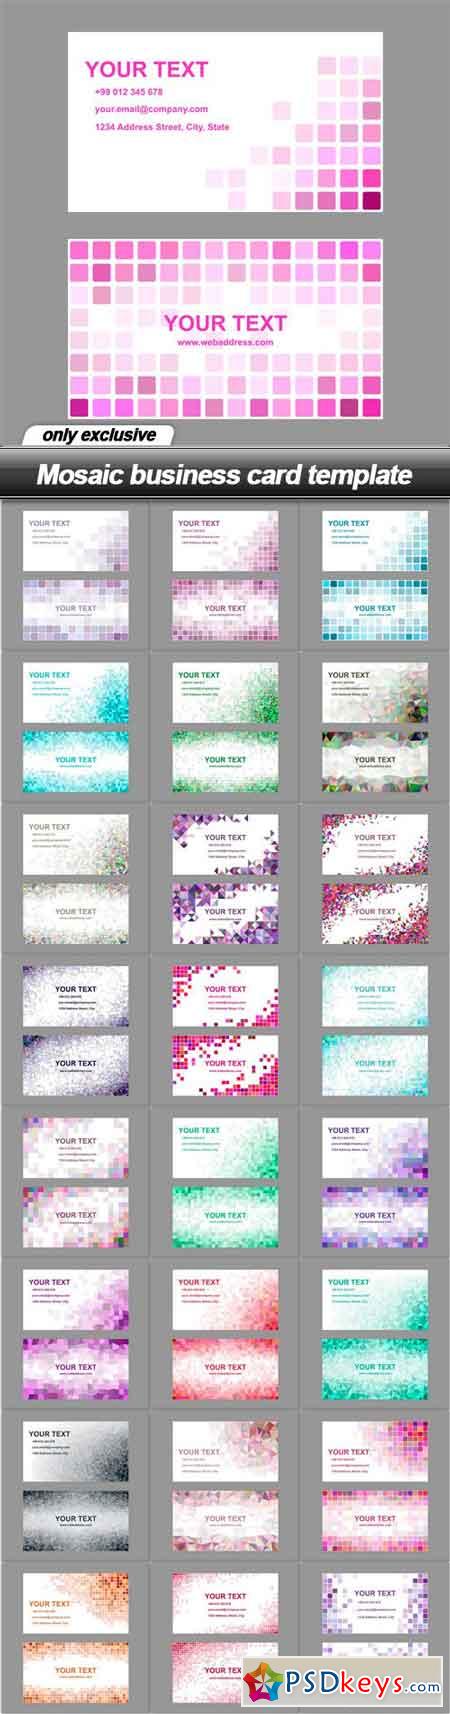 Mosaic business card template - 25 EPS